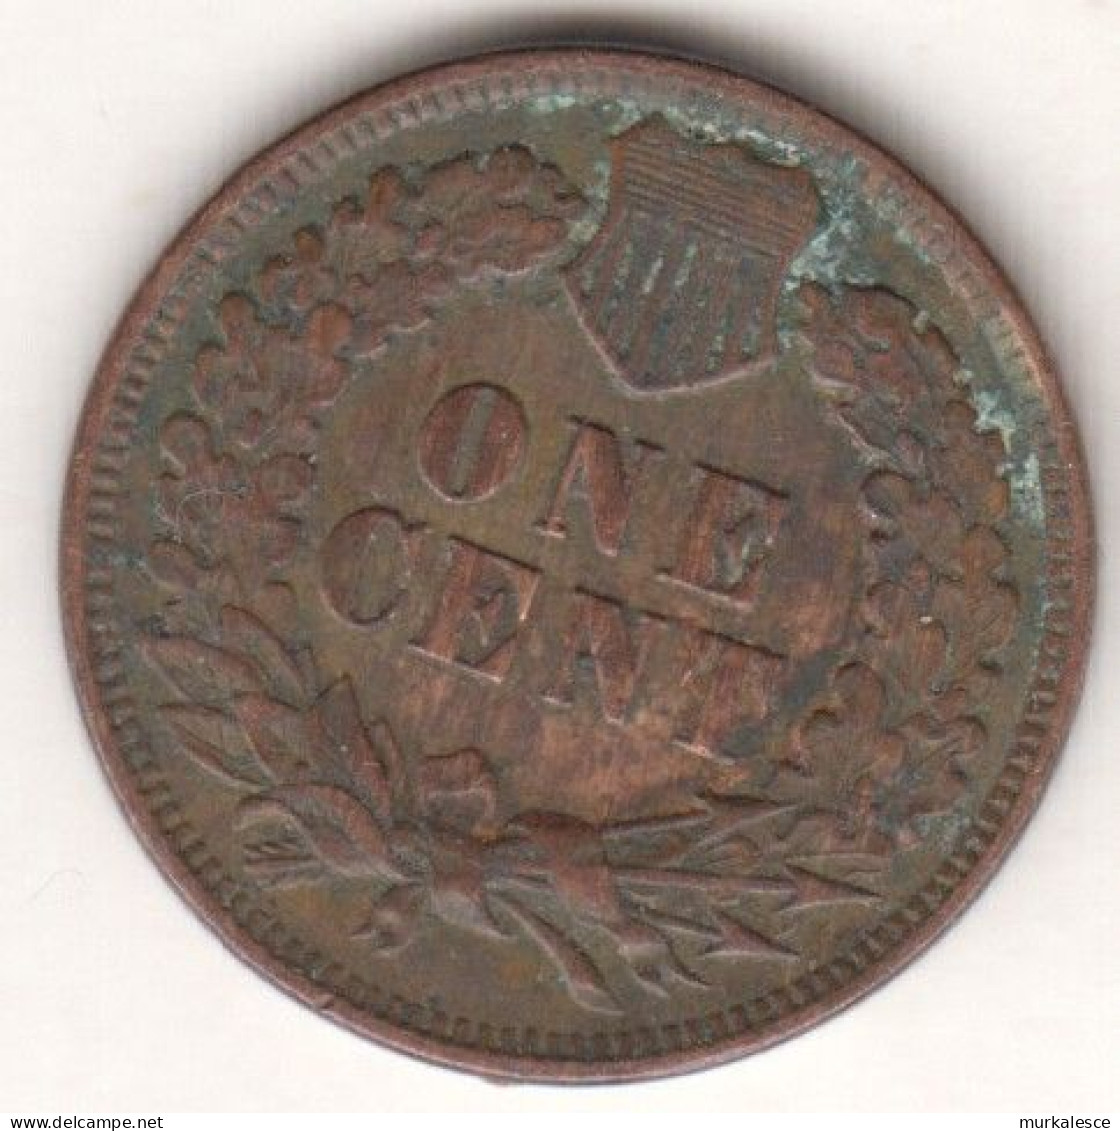 7317---  USA    ONE  CENT   1899 - 1859-1909: Indian Head